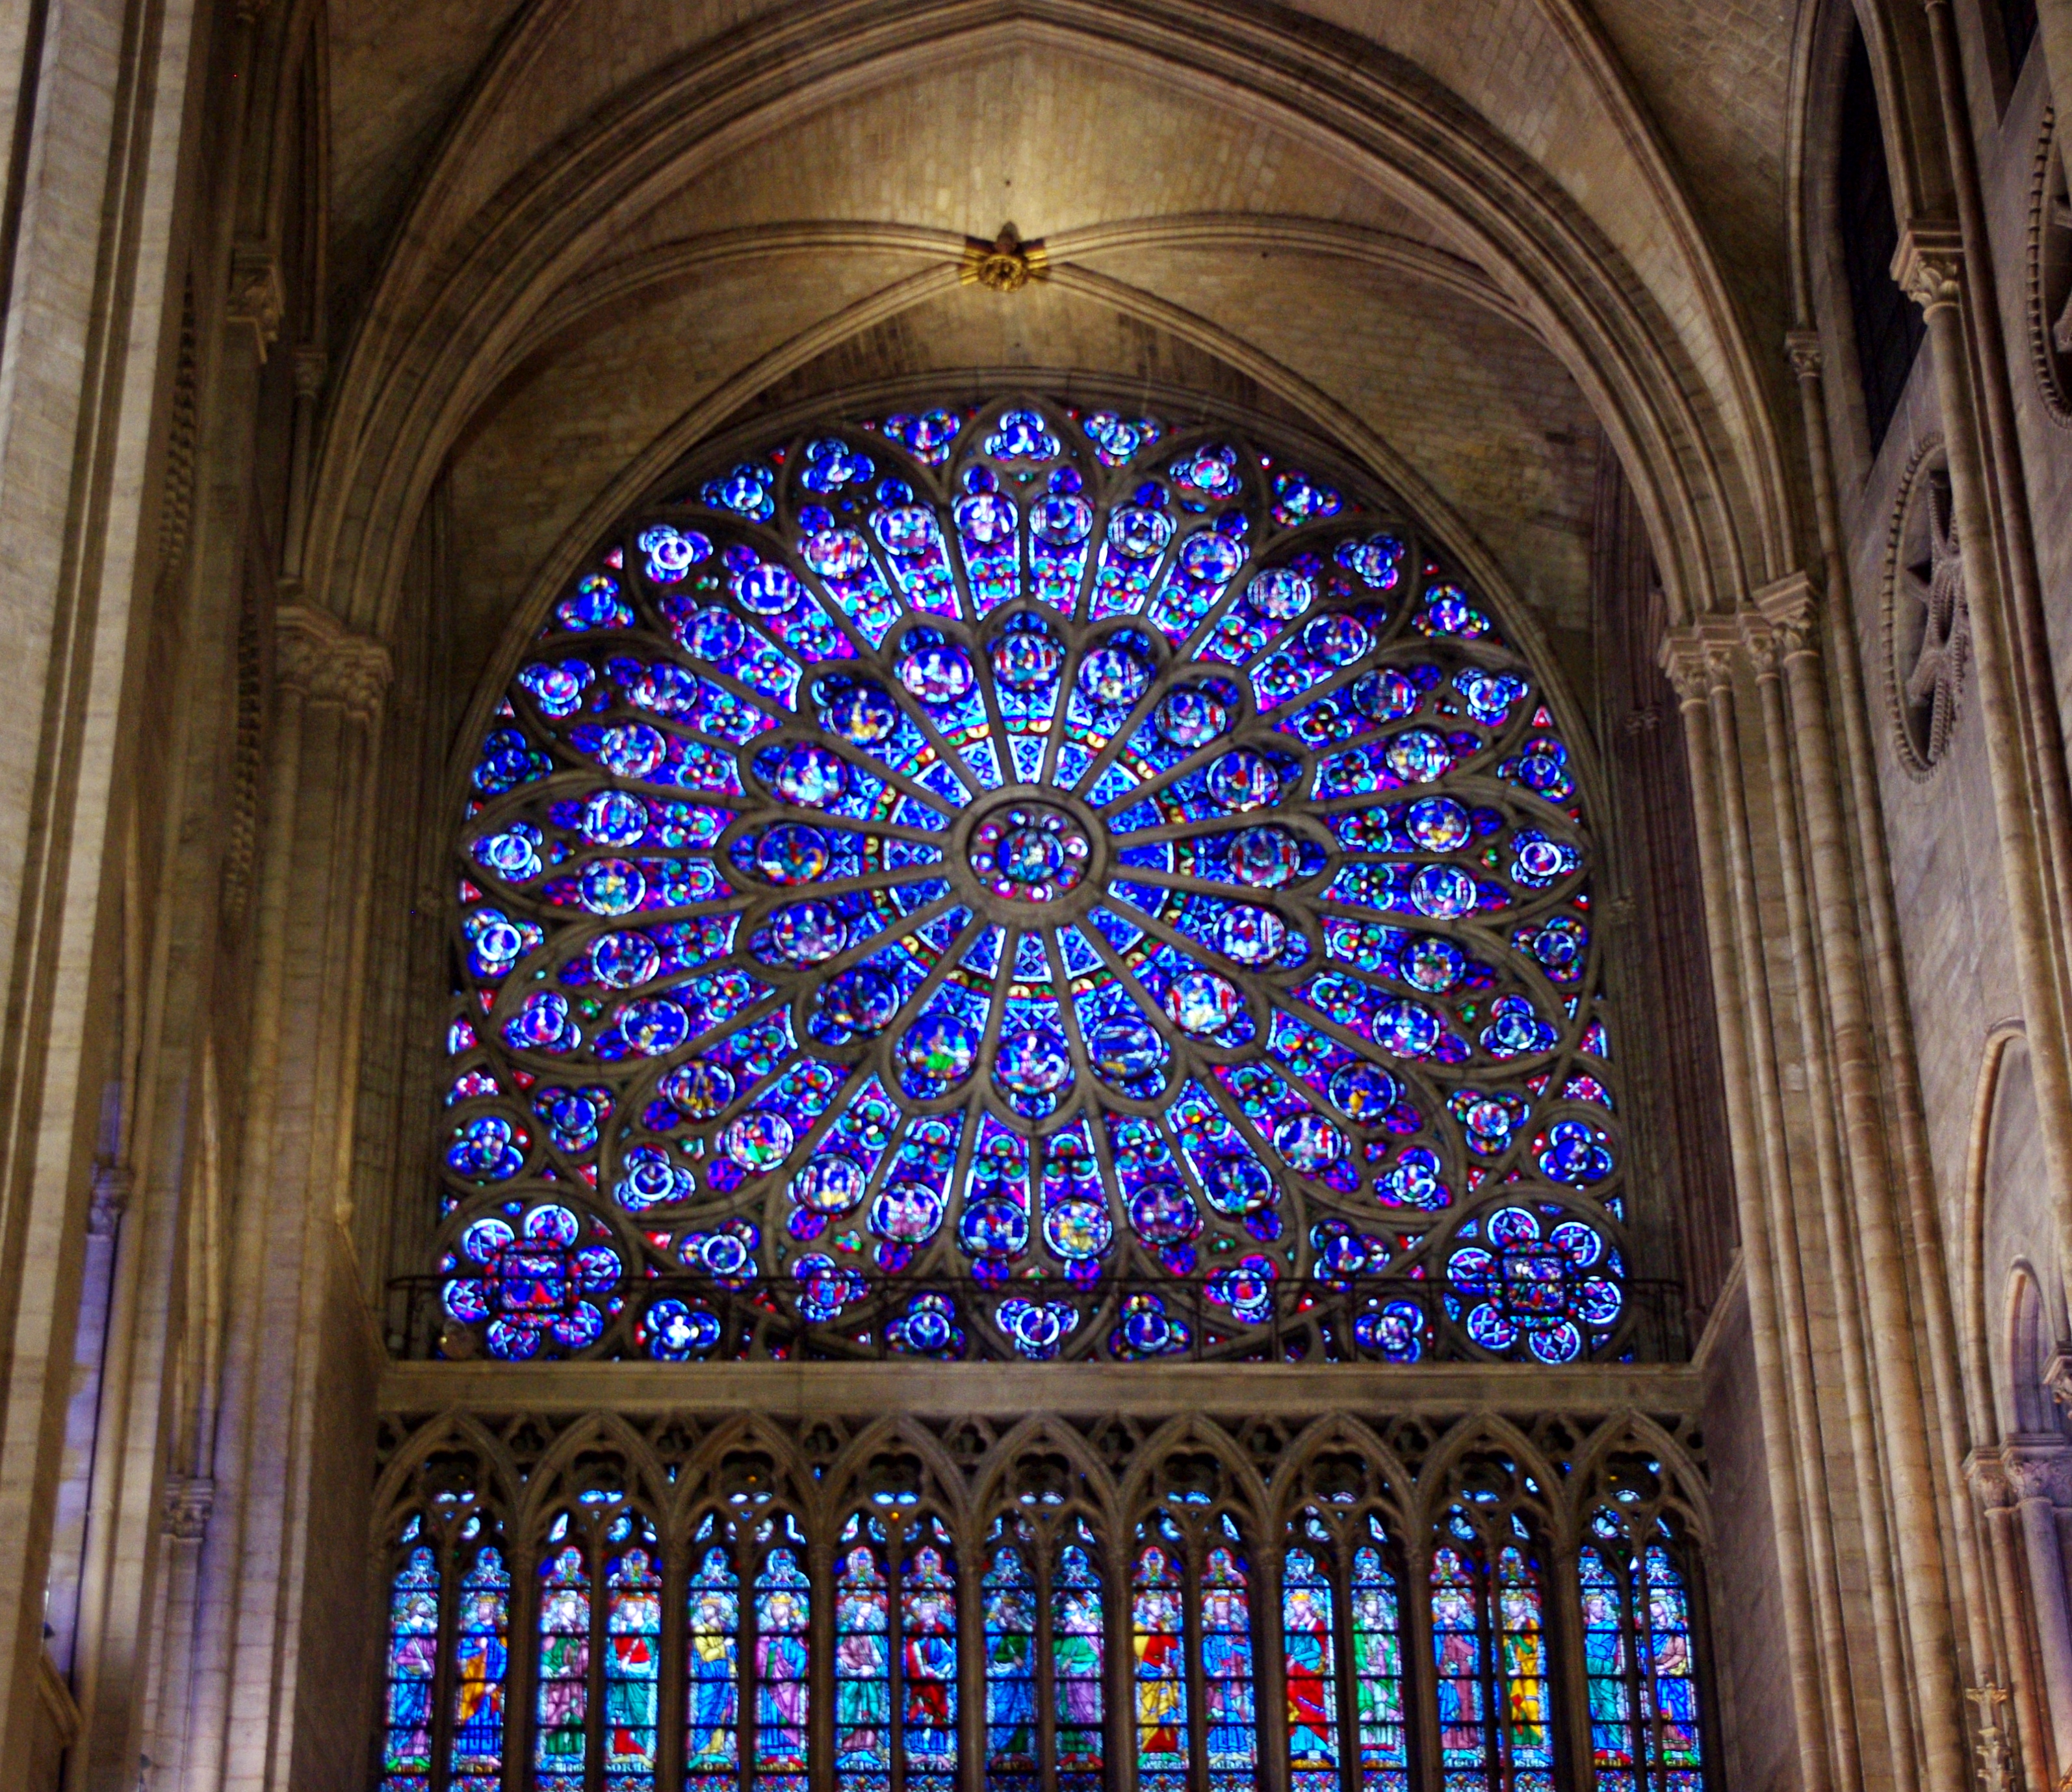 File:North Rose Window in Notre Dame, 2013.jpg - Wikimedia Commons